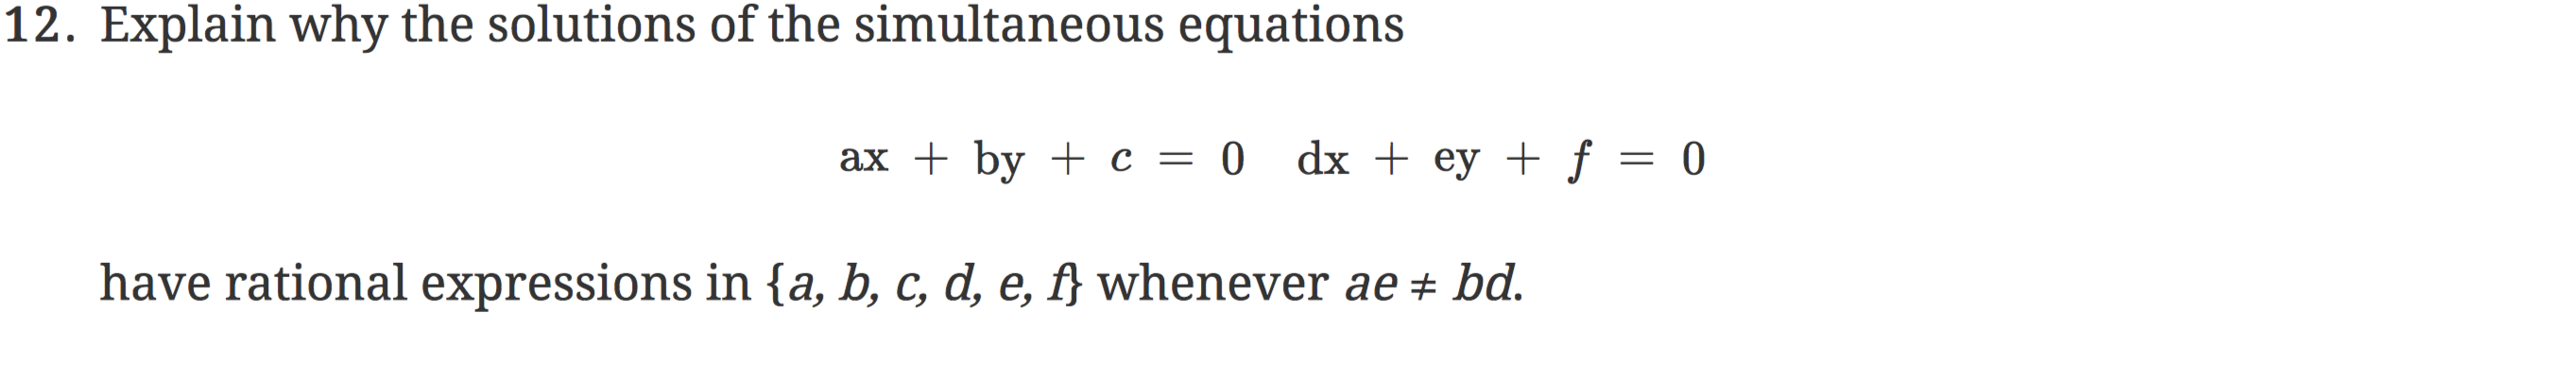 12. Explain why the solutions of the simultaneous equations
ax + by + c = 0 dx + ey + ƒ = 0
have rational expressions in {a, b, c, d, e, f} whenever ae + bd.
